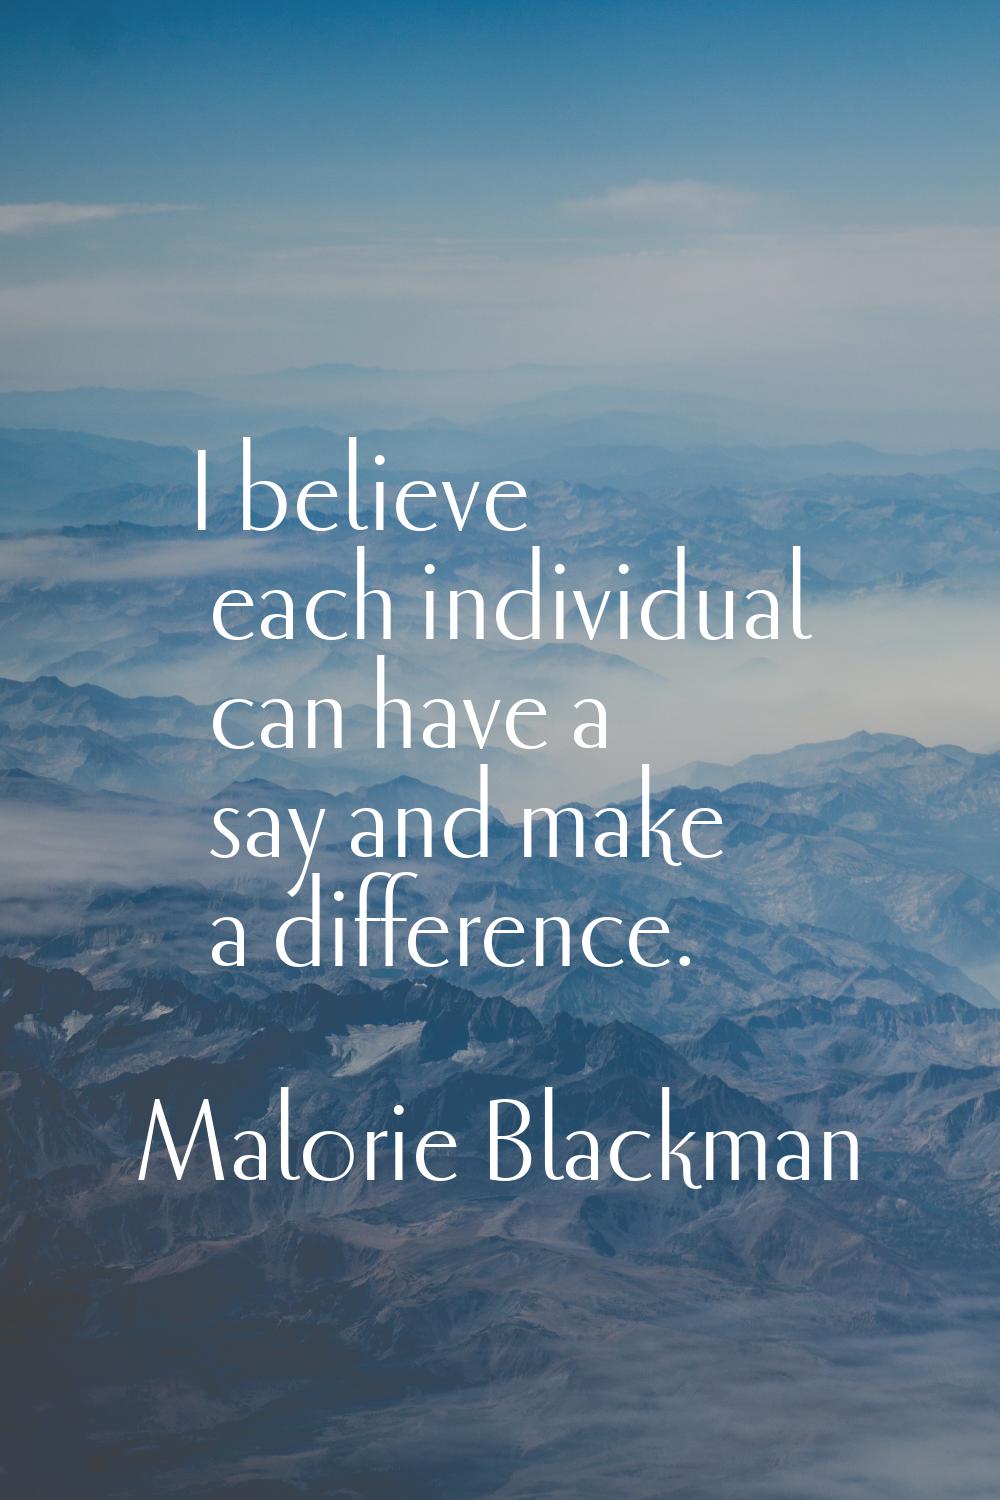 I believe each individual can have a say and make a difference.